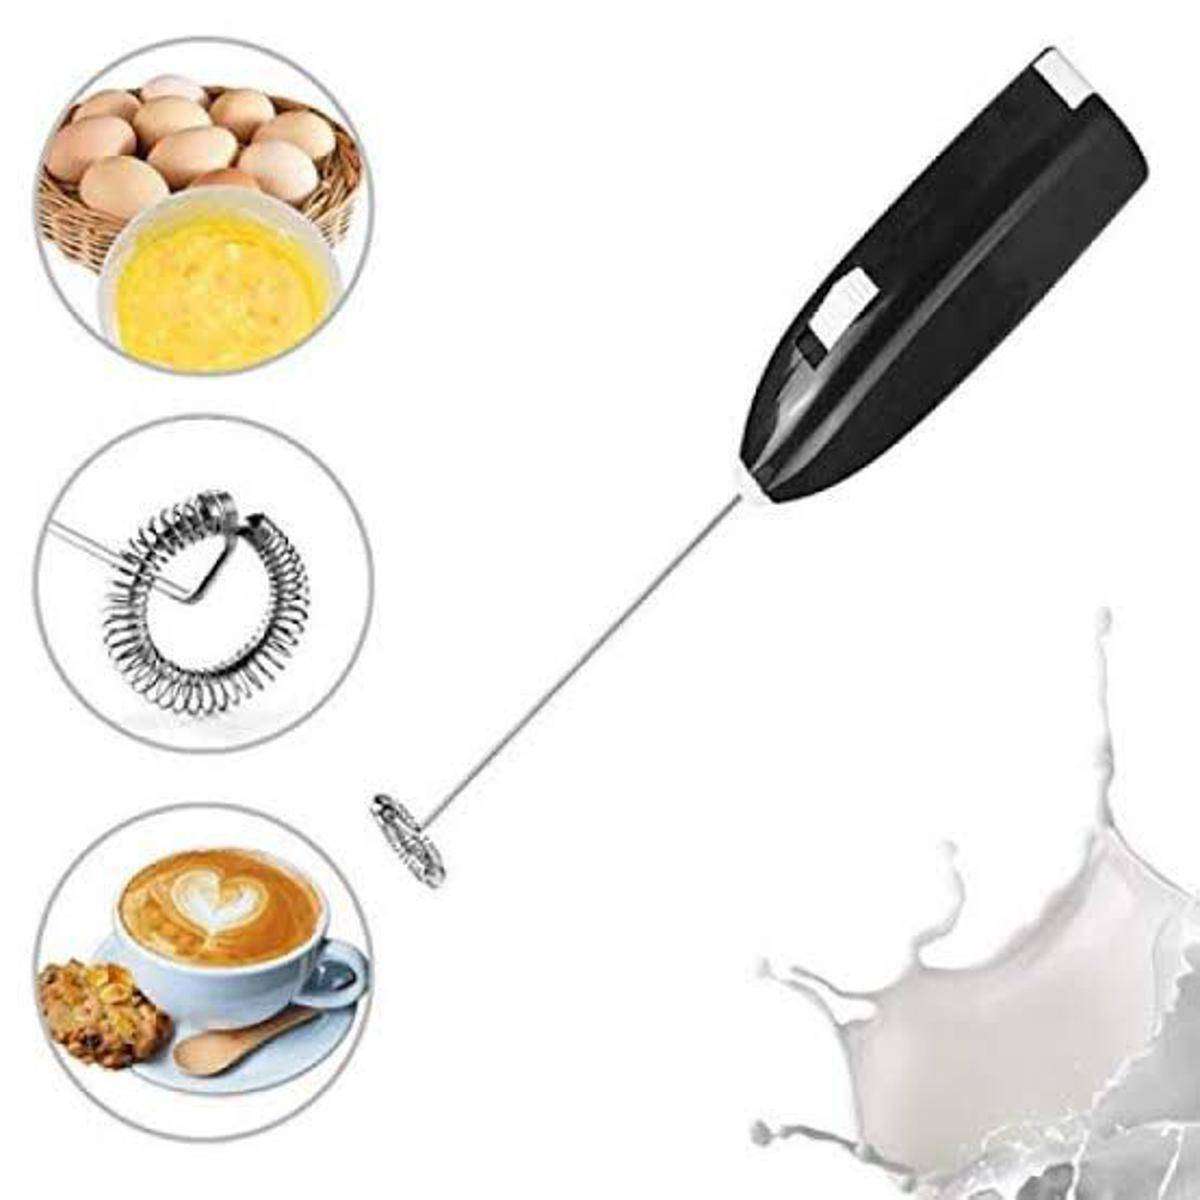 Coffee Beater,2 in 1 Electric Coffee mixer and eggbeater, handheld  rechargeable coffee beater, powerful milk frother, Portable coffee mixer,  eggbeater hand mixer, electric blender with two detachable whisks by EC mart